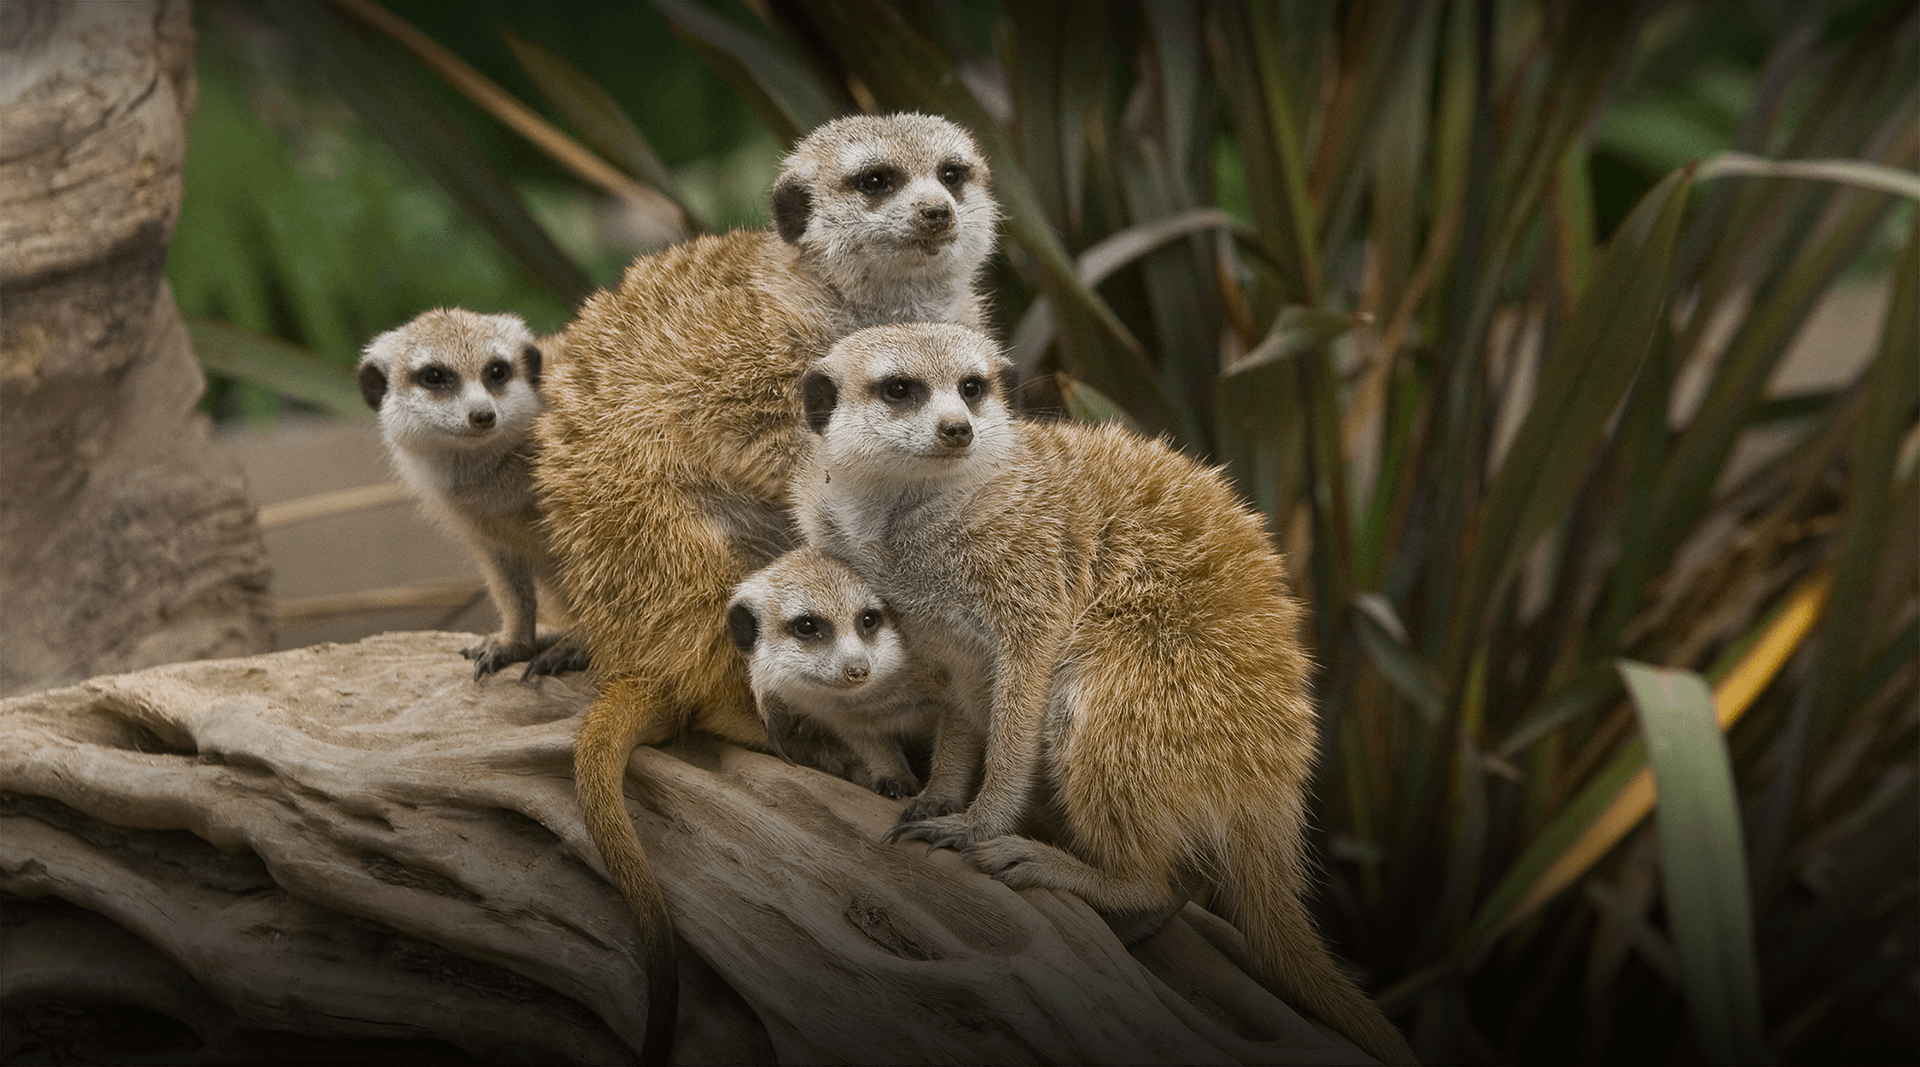 A group of meerkats look right.